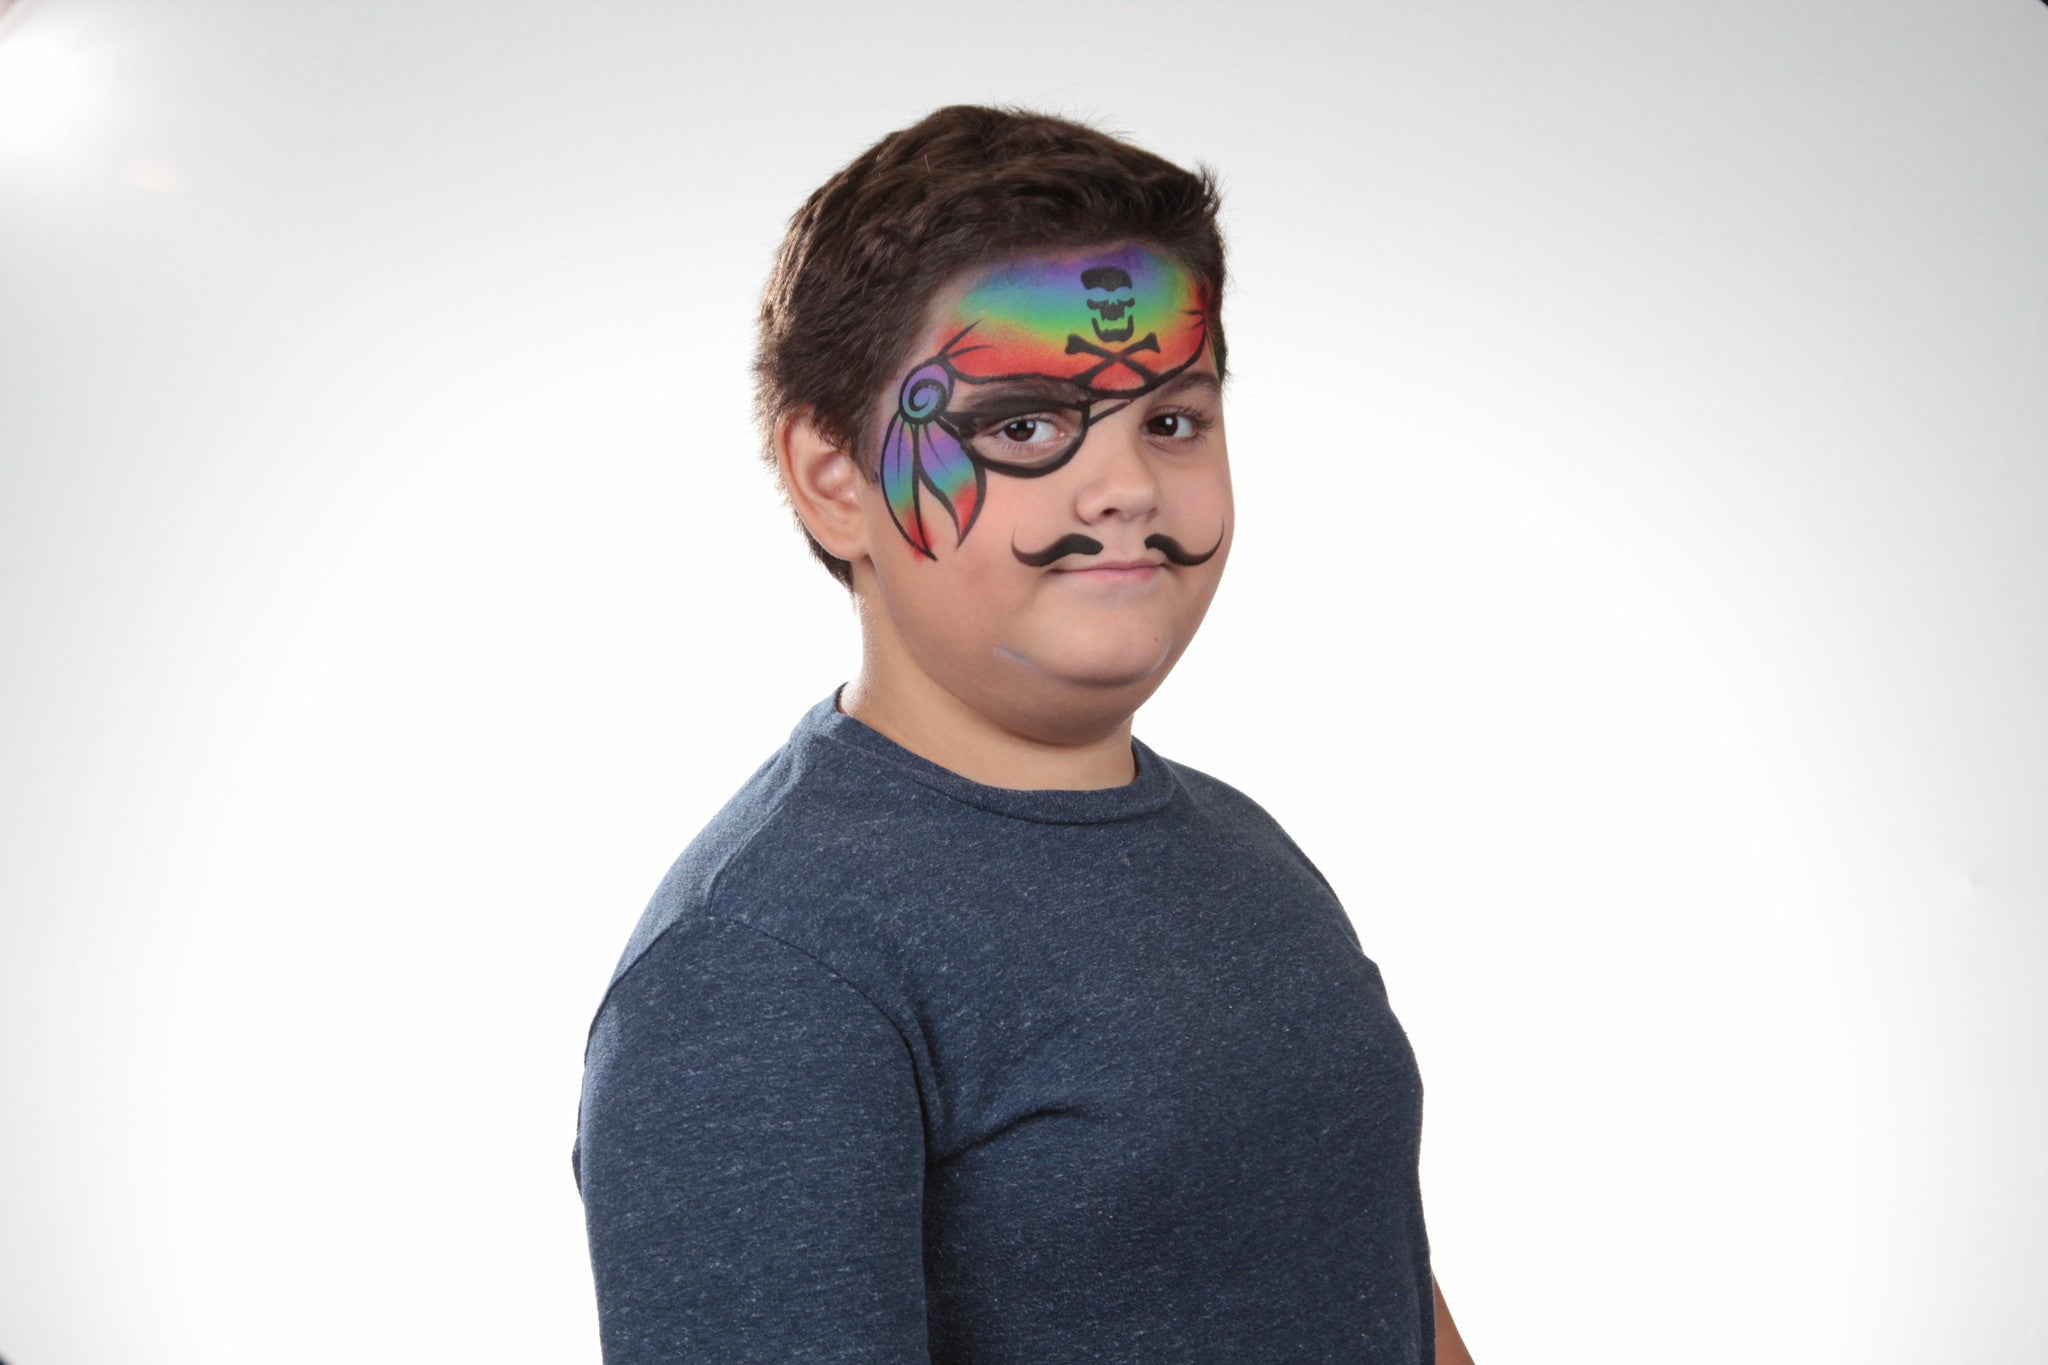 Silly FACEfun Face Painting Kits